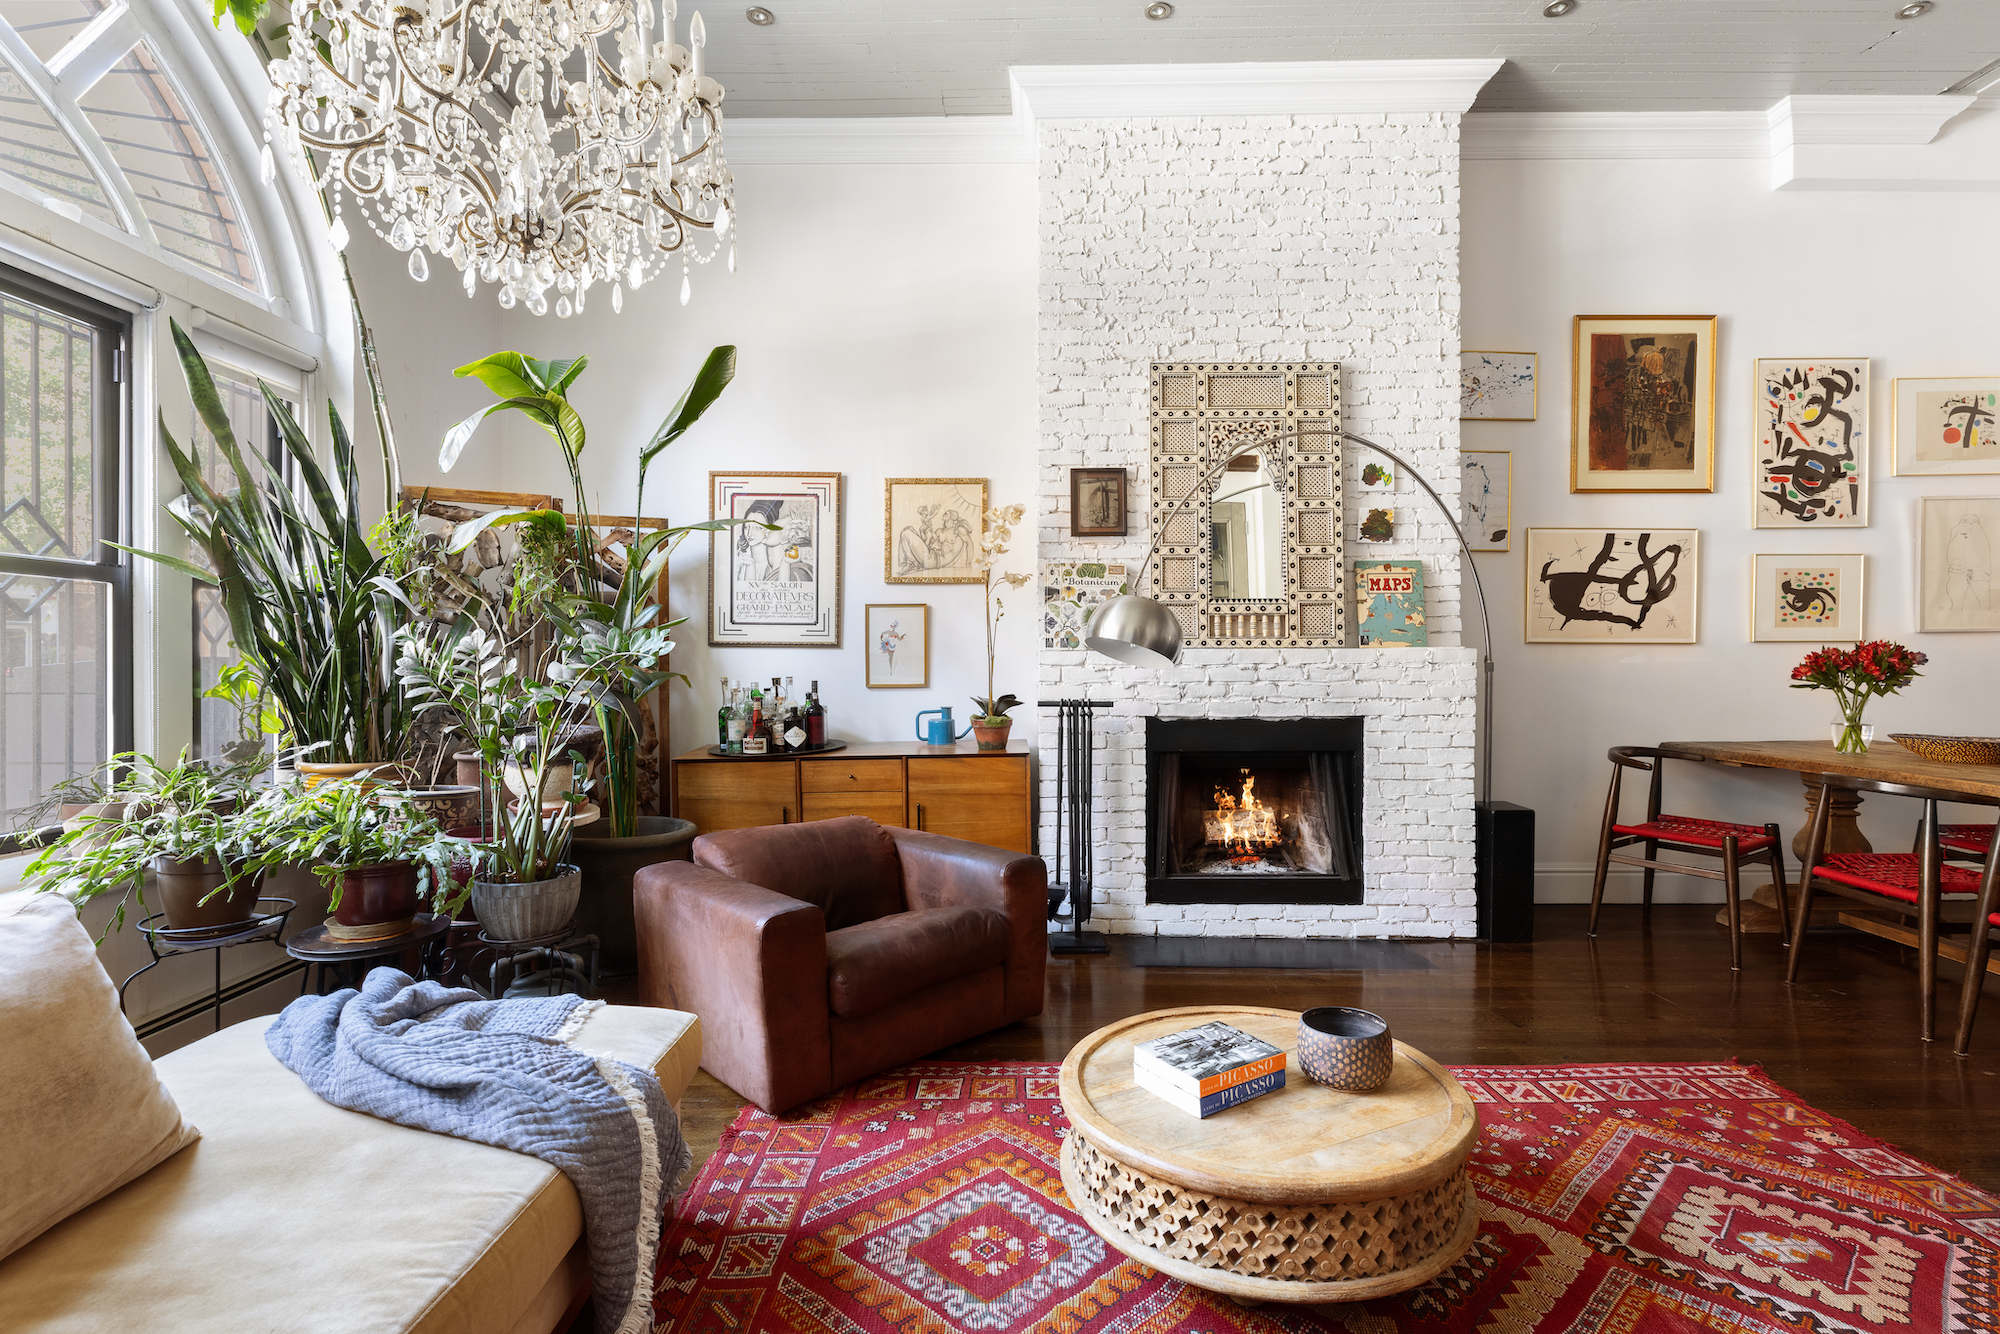 Beautiful Fort Greene apartment once home to Notorious B.I.G.